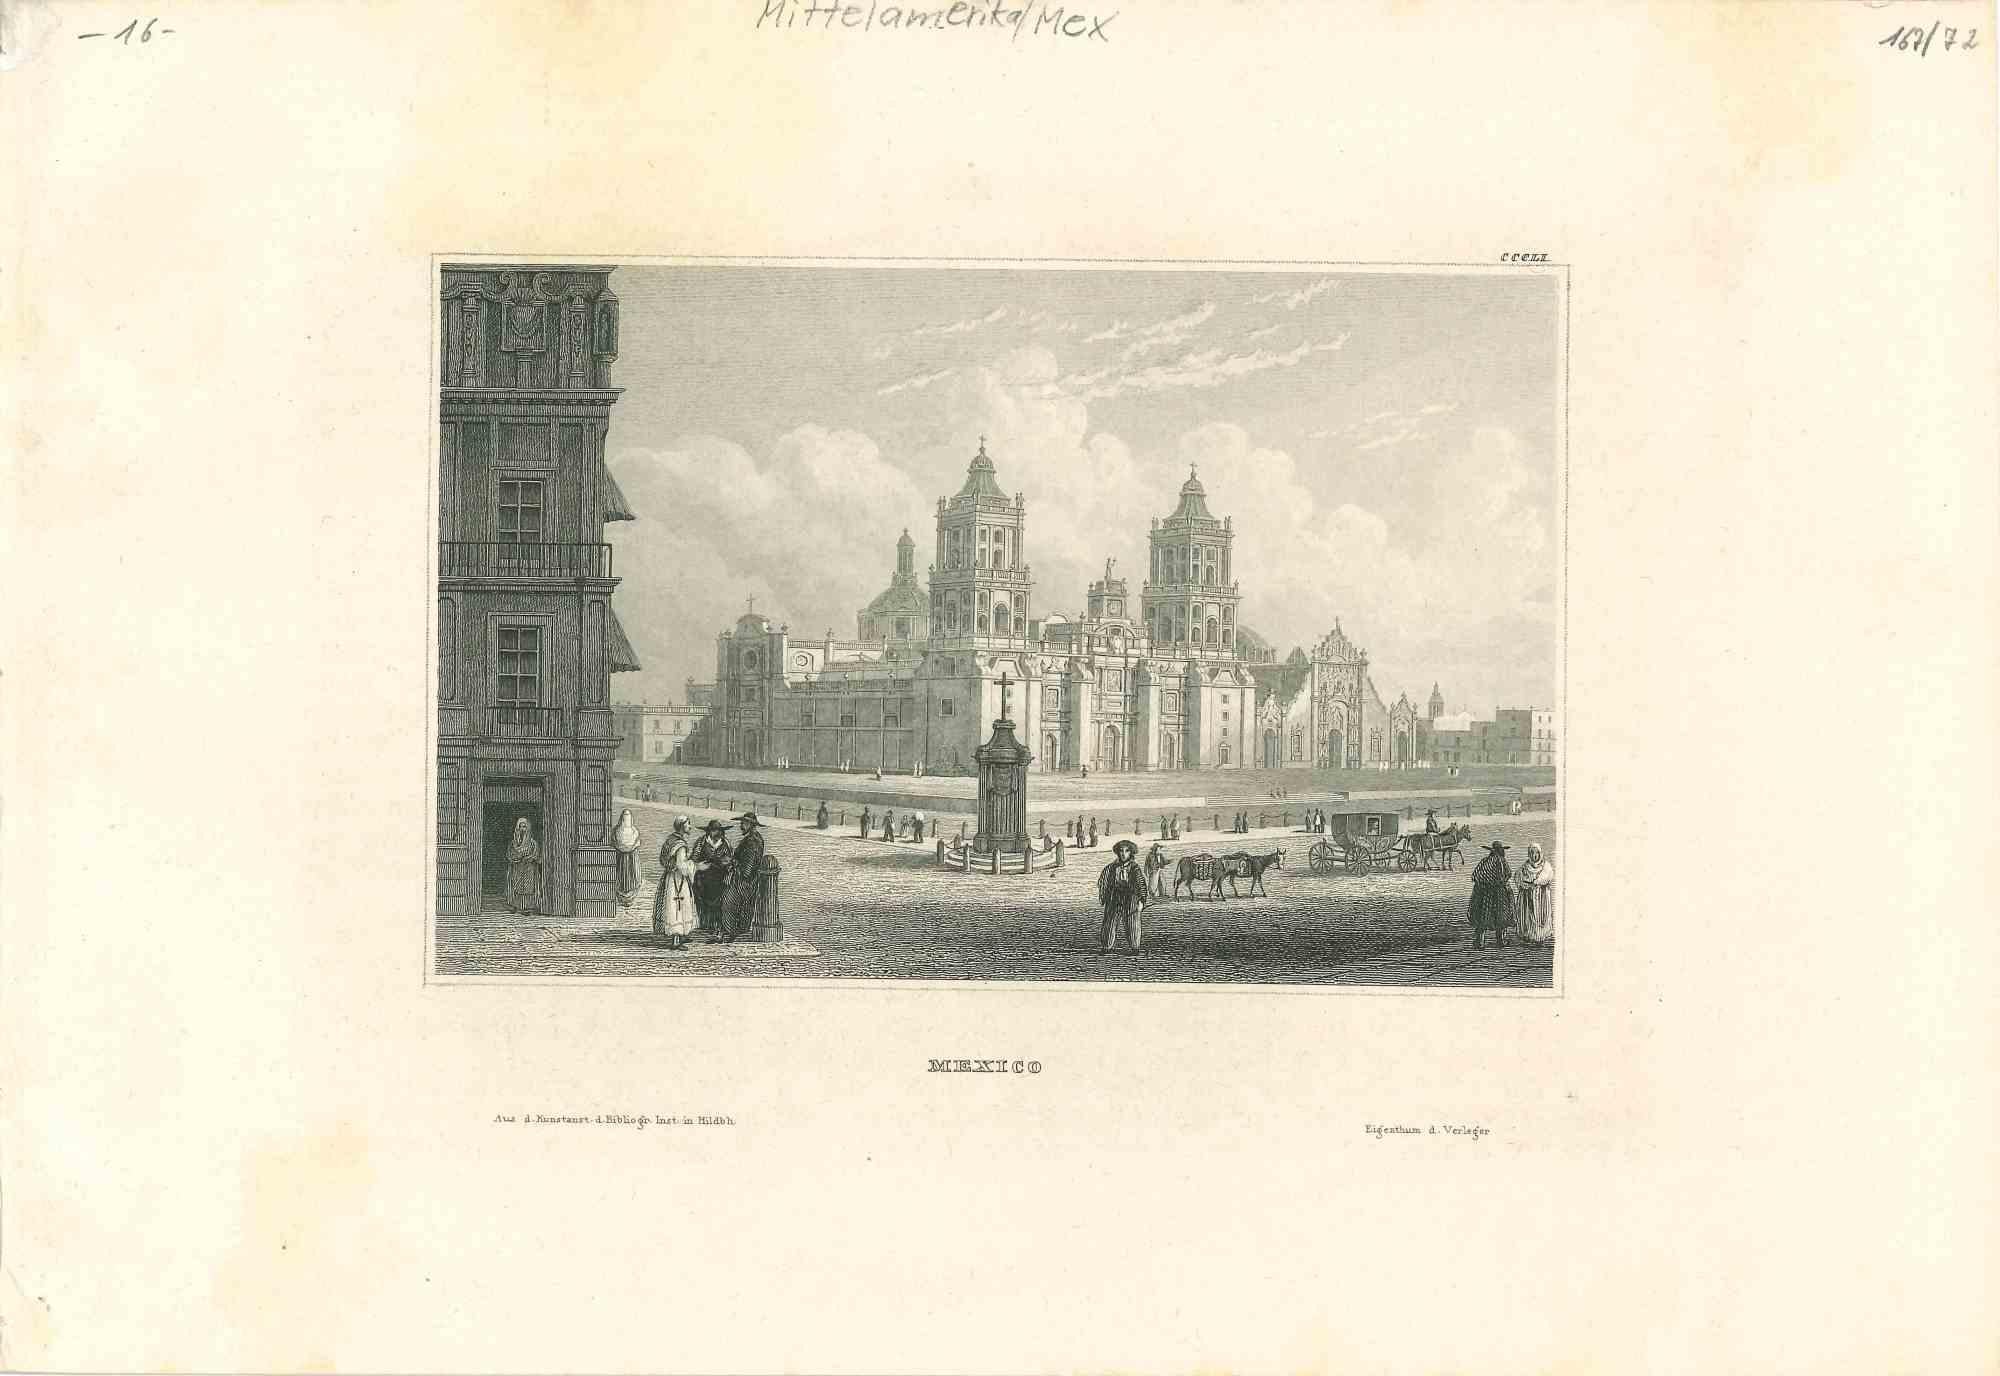 Unknown Figurative Print - Ancient View of Mexico City - Original Lithograph - Early 19th Century